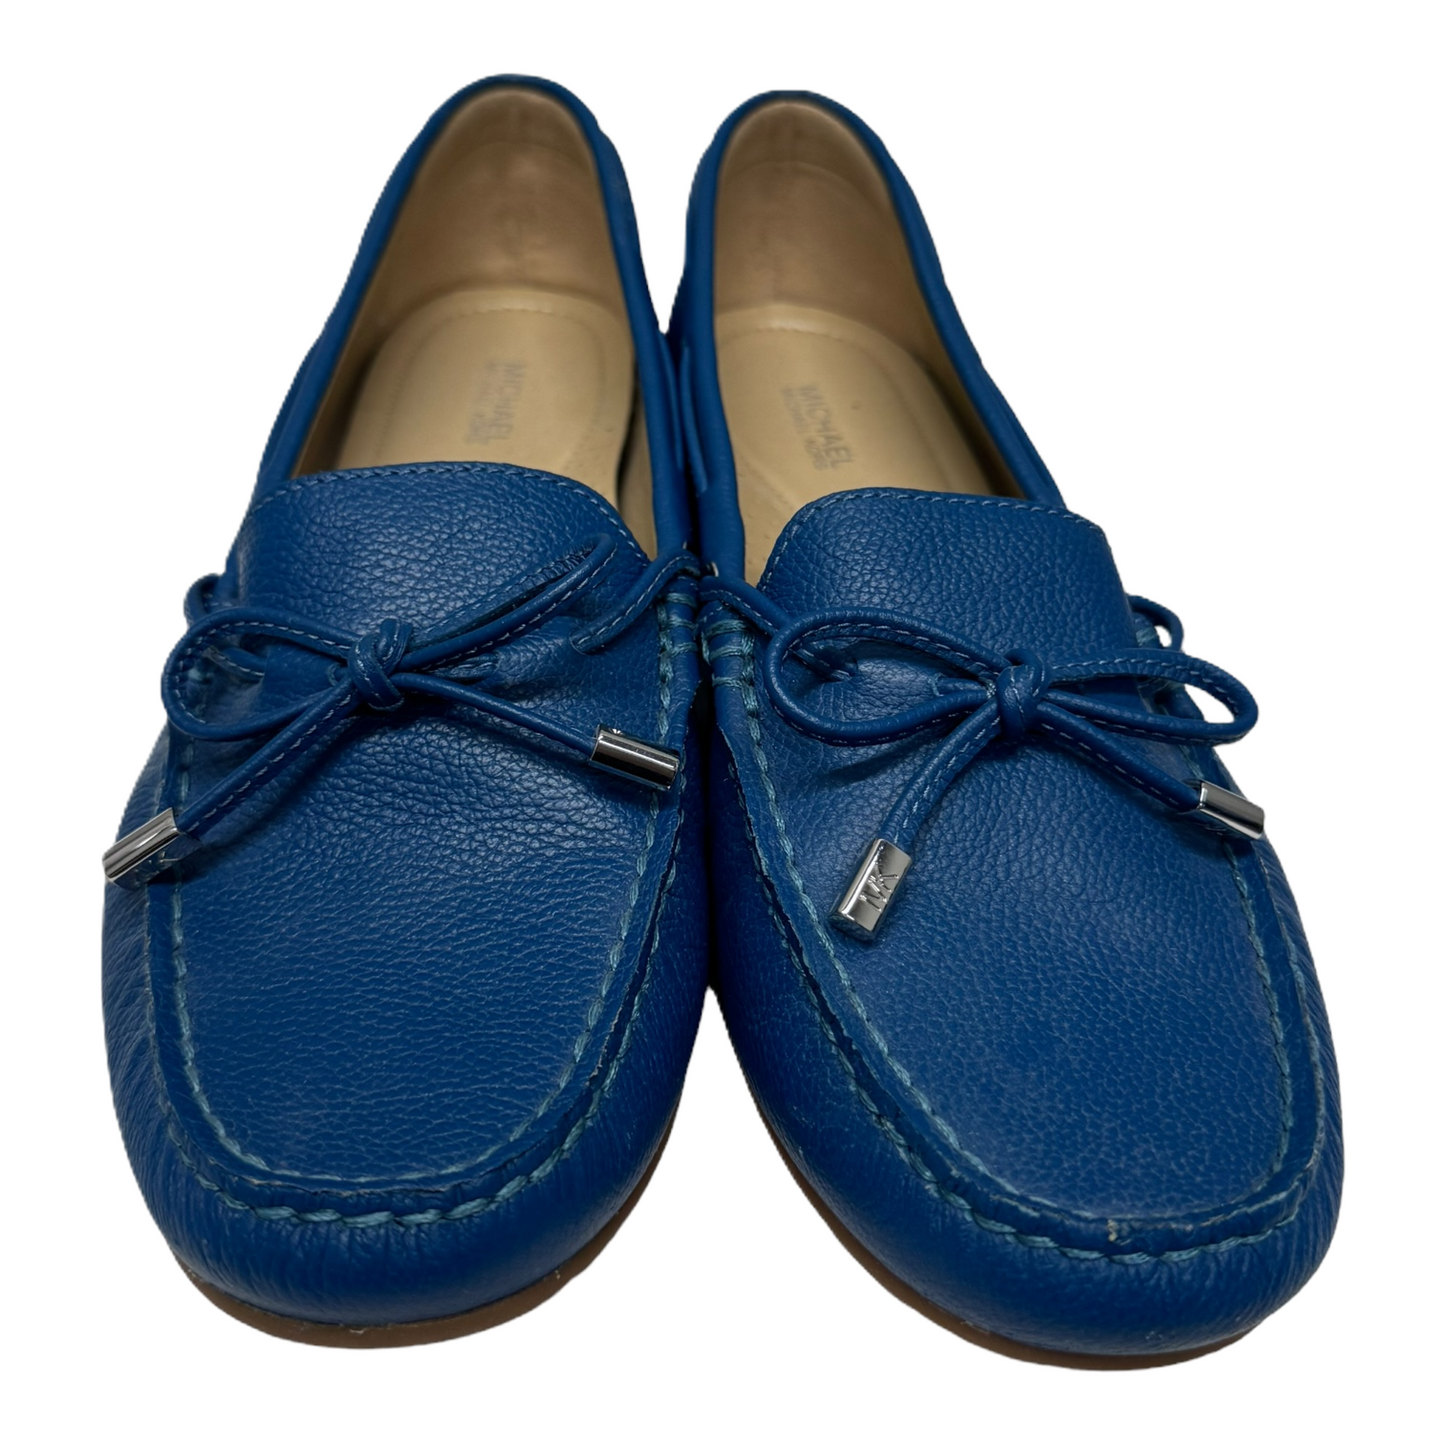 Blue Shoes Flats By Michael By Michael Kors, Size: 9.5